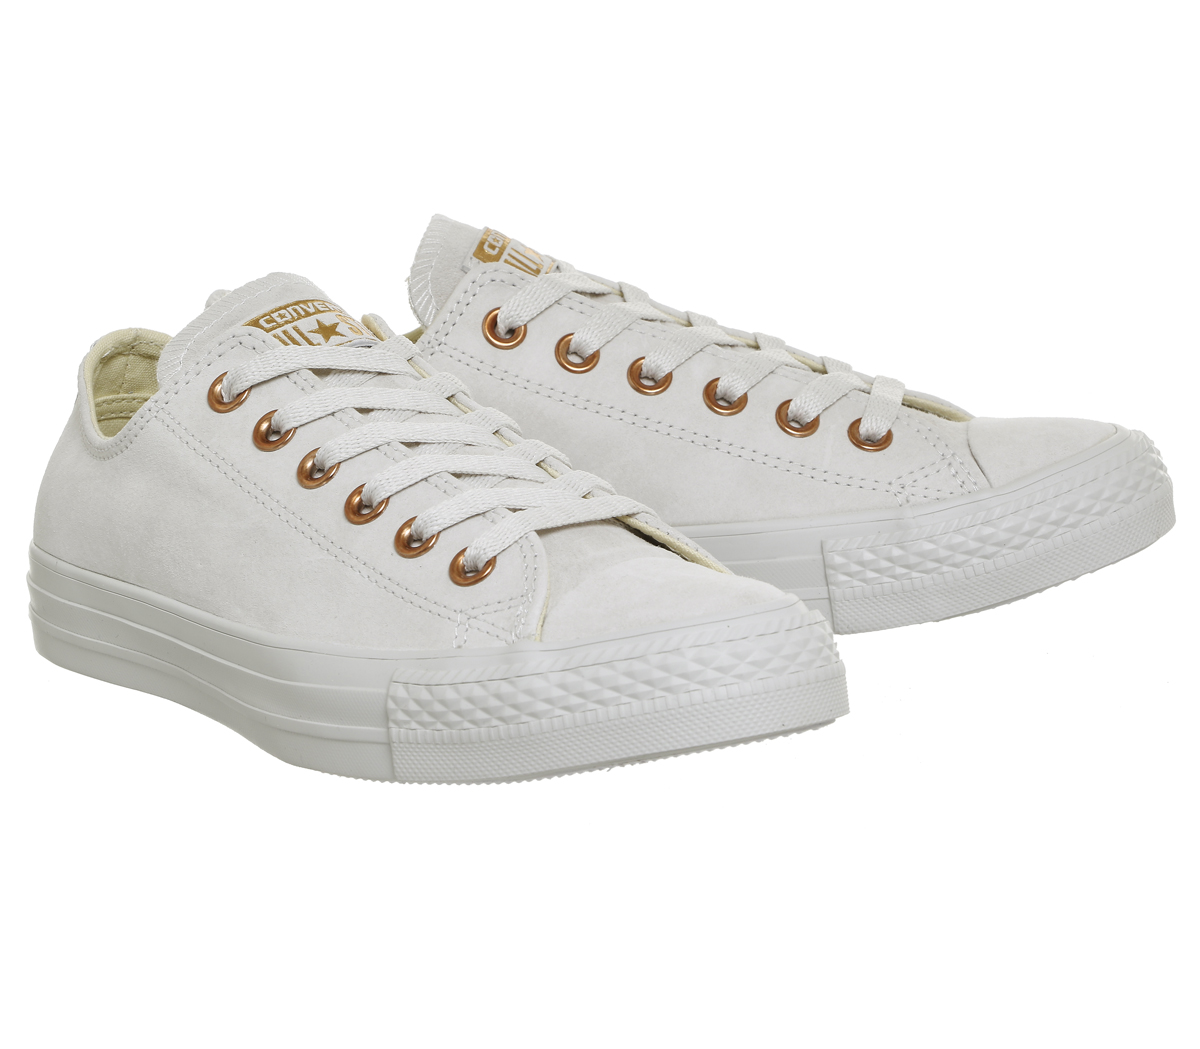 converse leather white rose gold Shop 